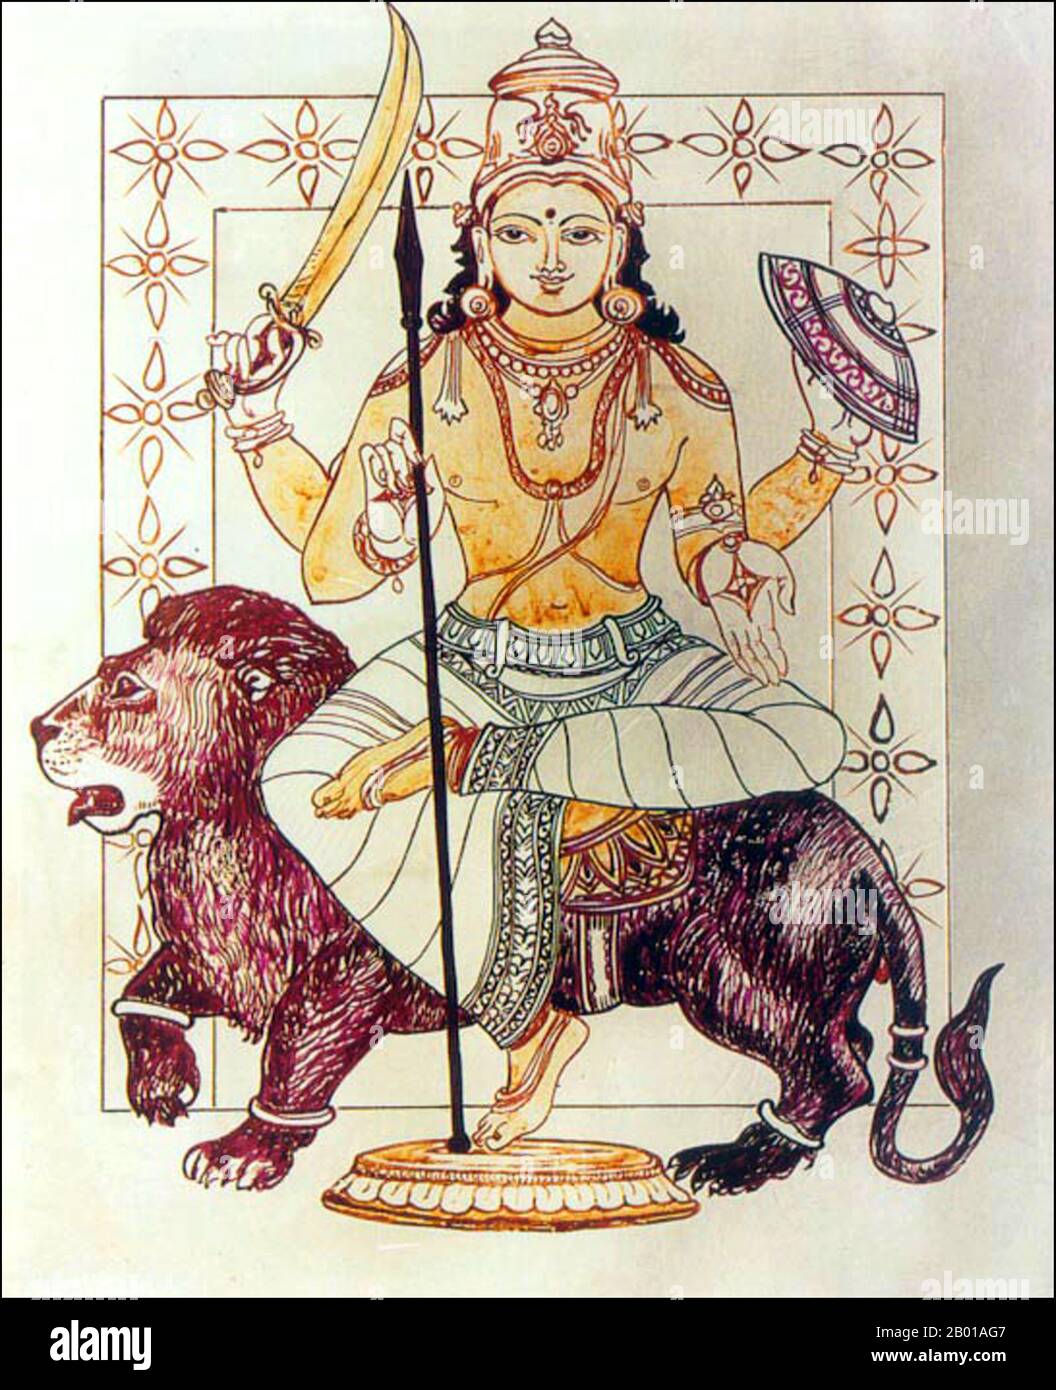 India: An Indian representation of Rahu, Snake Demon and causer of solar and lunar eclipses.  In Hindu mythology, Rahu is a snake that swallows the sun or the moon causing eclipses. He is depicted in art as a dragon with no body riding a chariot drawn by eight black horses. Rahu is one of the navagrahas (nine planets) in Vedic astrology. The Rahu kala (time of day under the influence of Rahu) is considered inauspicious. Stock Photo